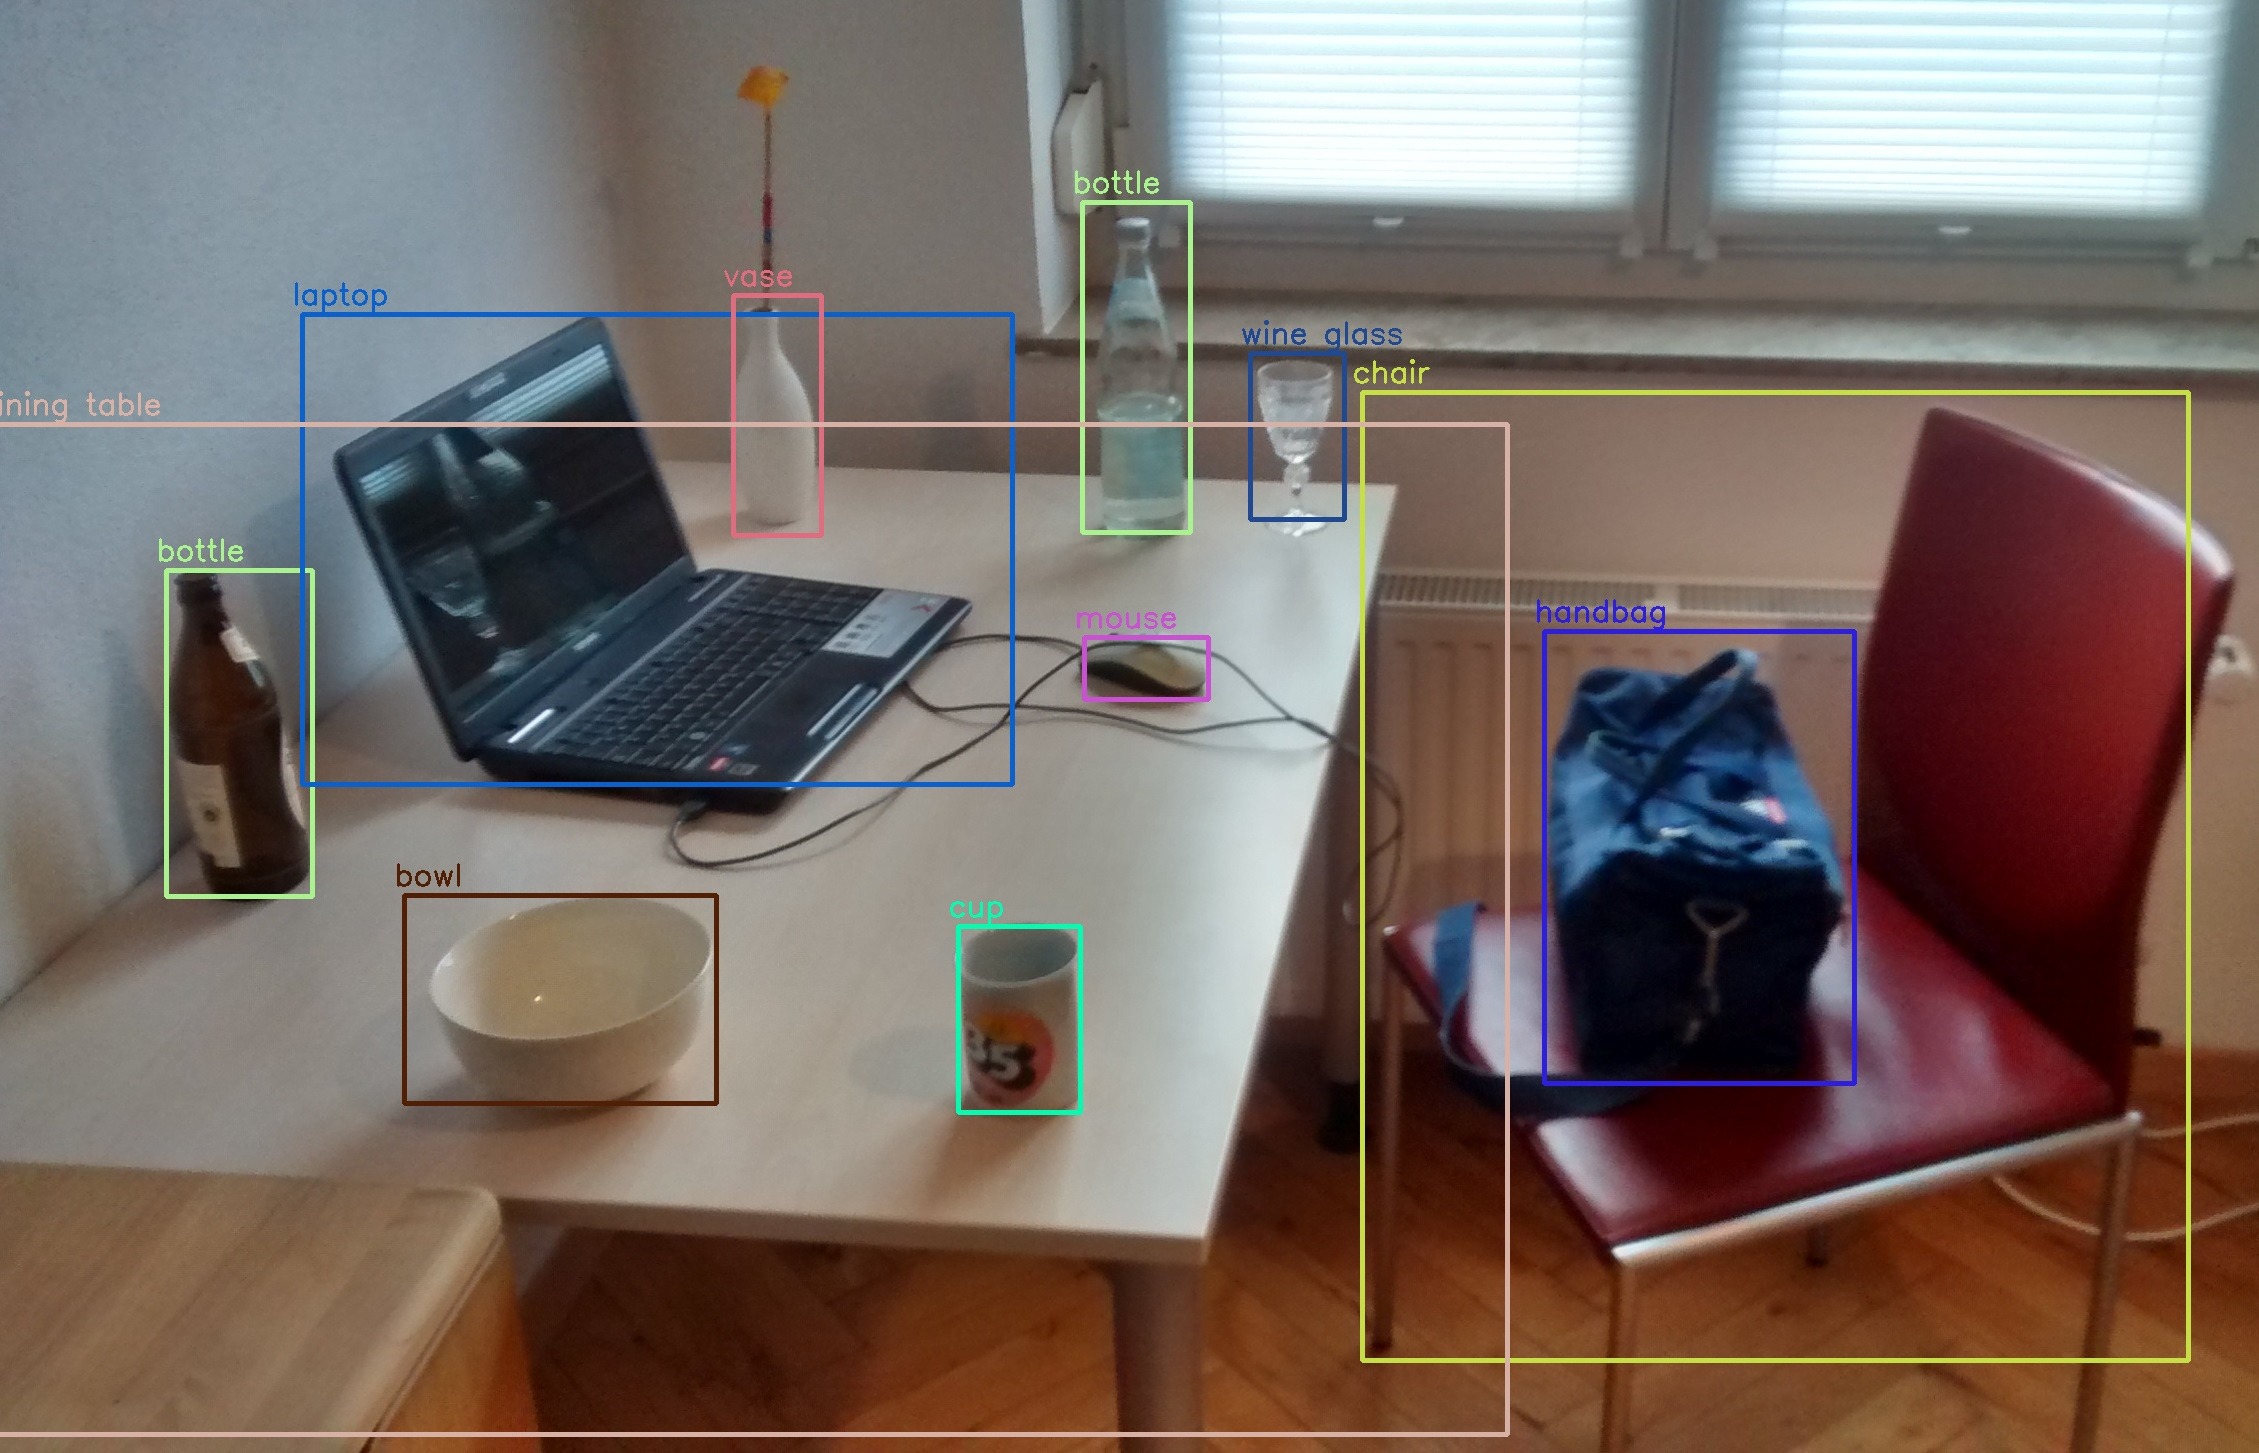 Object detection utilization for detecting home objects